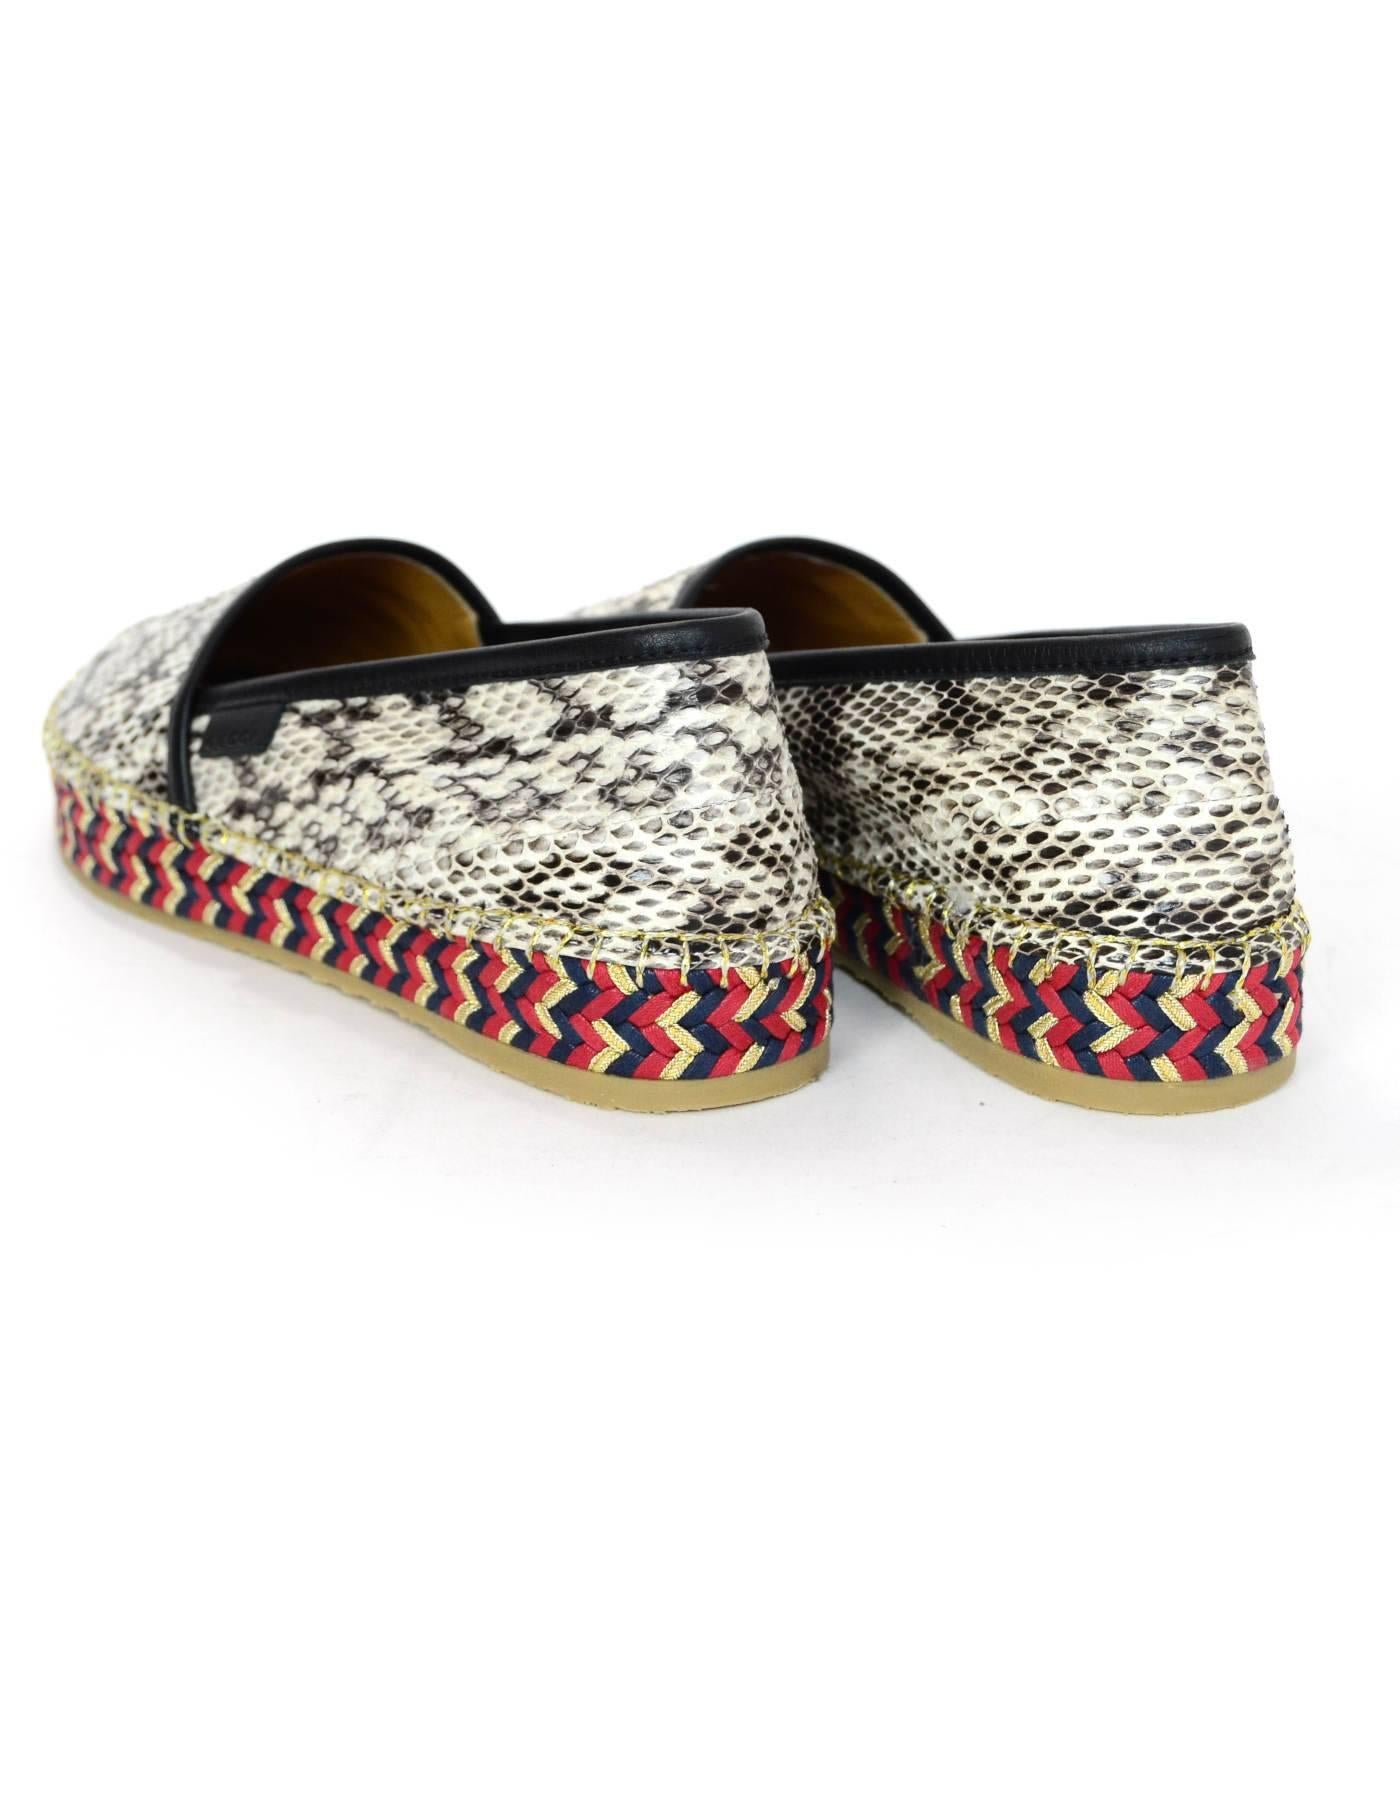 Gucci Snakeskin Pilar Espadrilles Sz 36.5 NIB In Excellent Condition In New York, NY